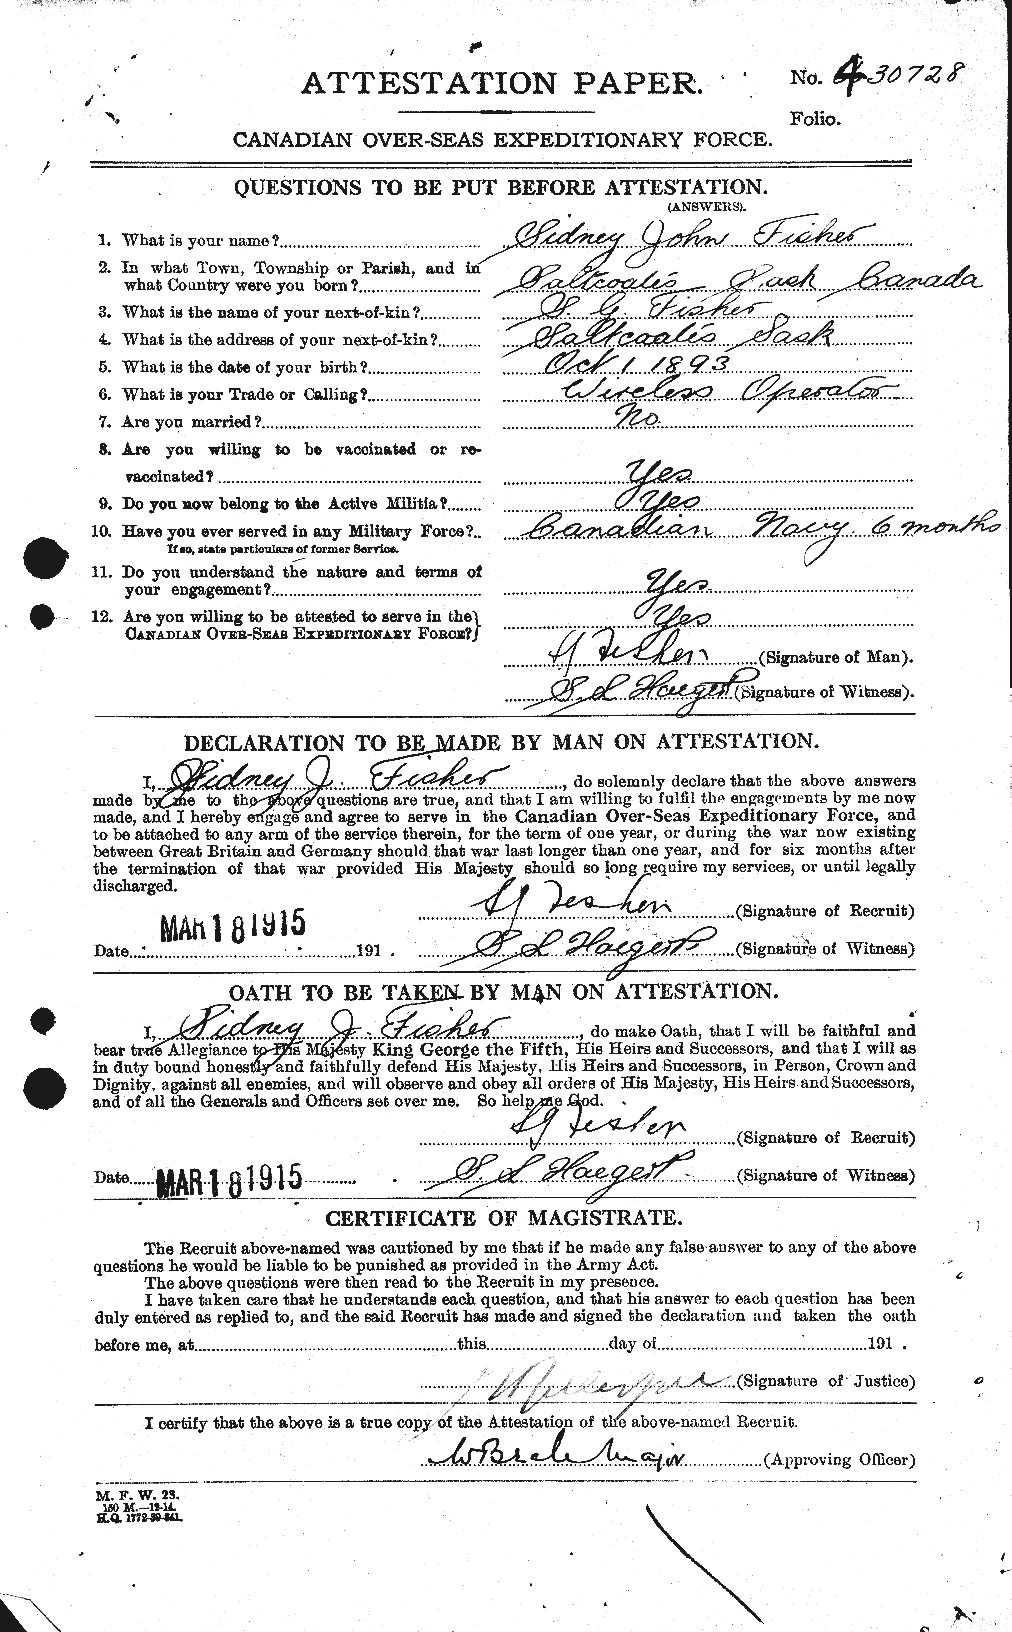 Personnel Records of the First World War - CEF 322348a